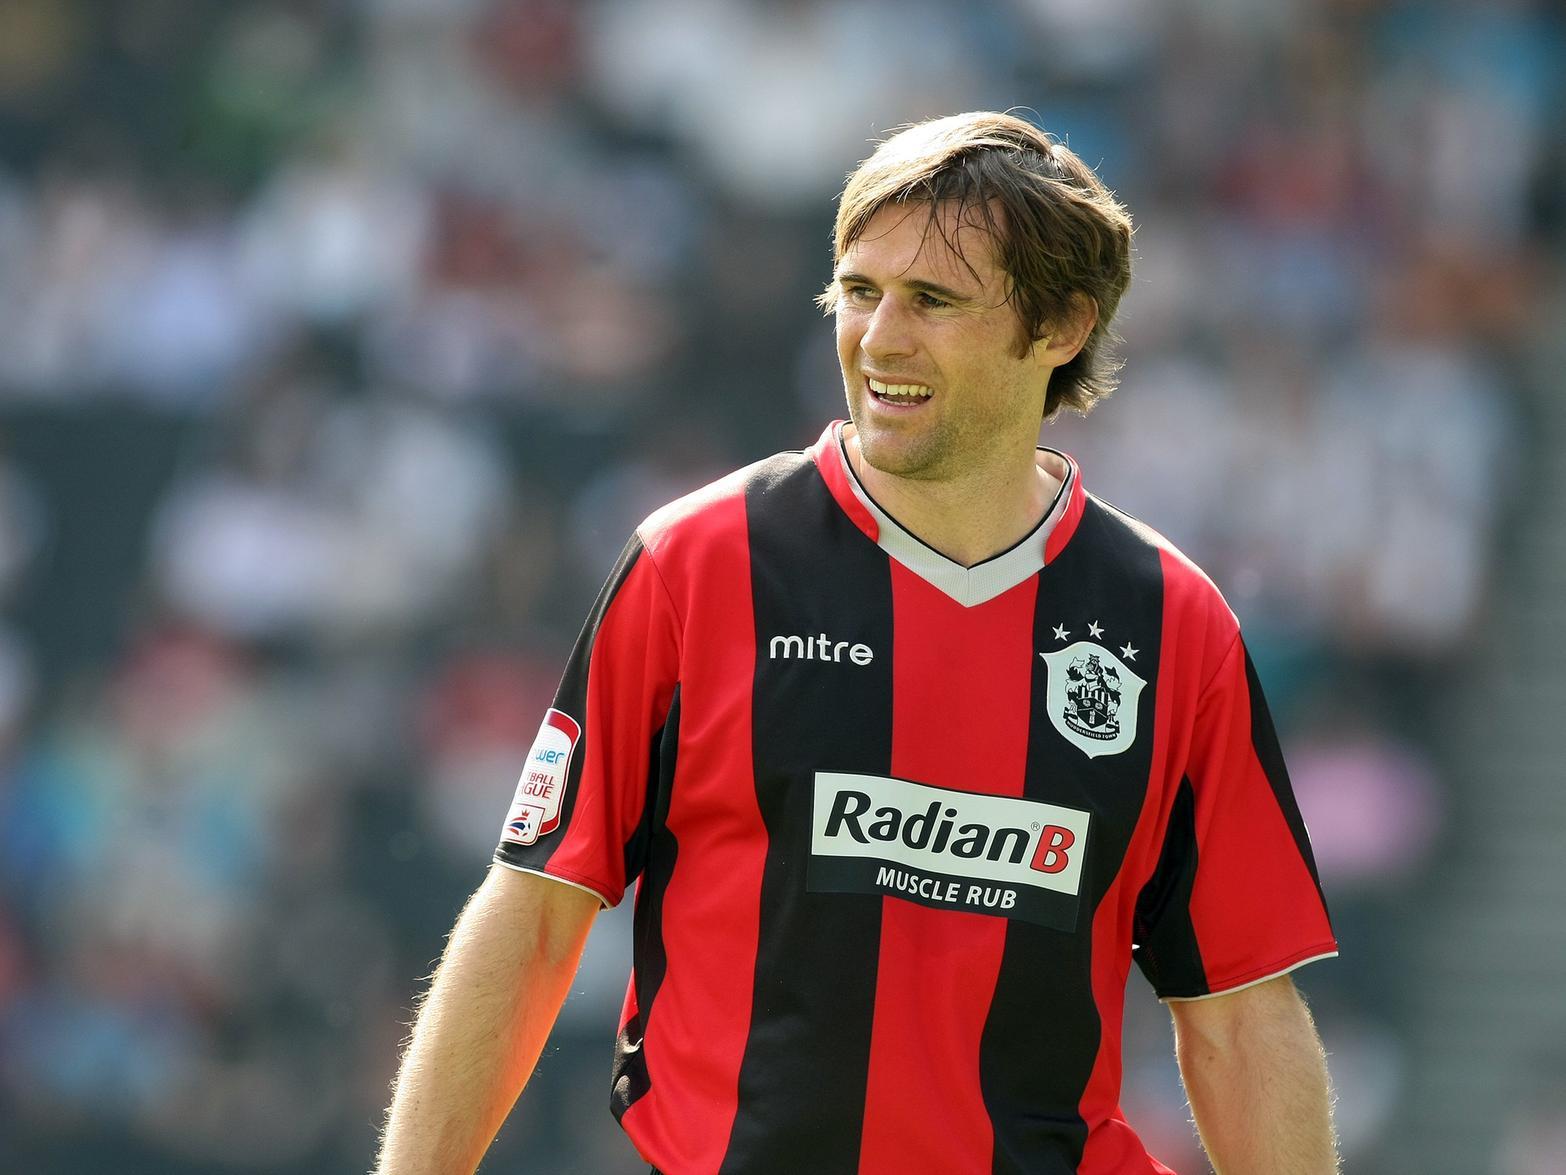 After a long career with Everton, West Brom, Sunderland and Wigan, Kevin Kilbane retired and is now a TV pundit.